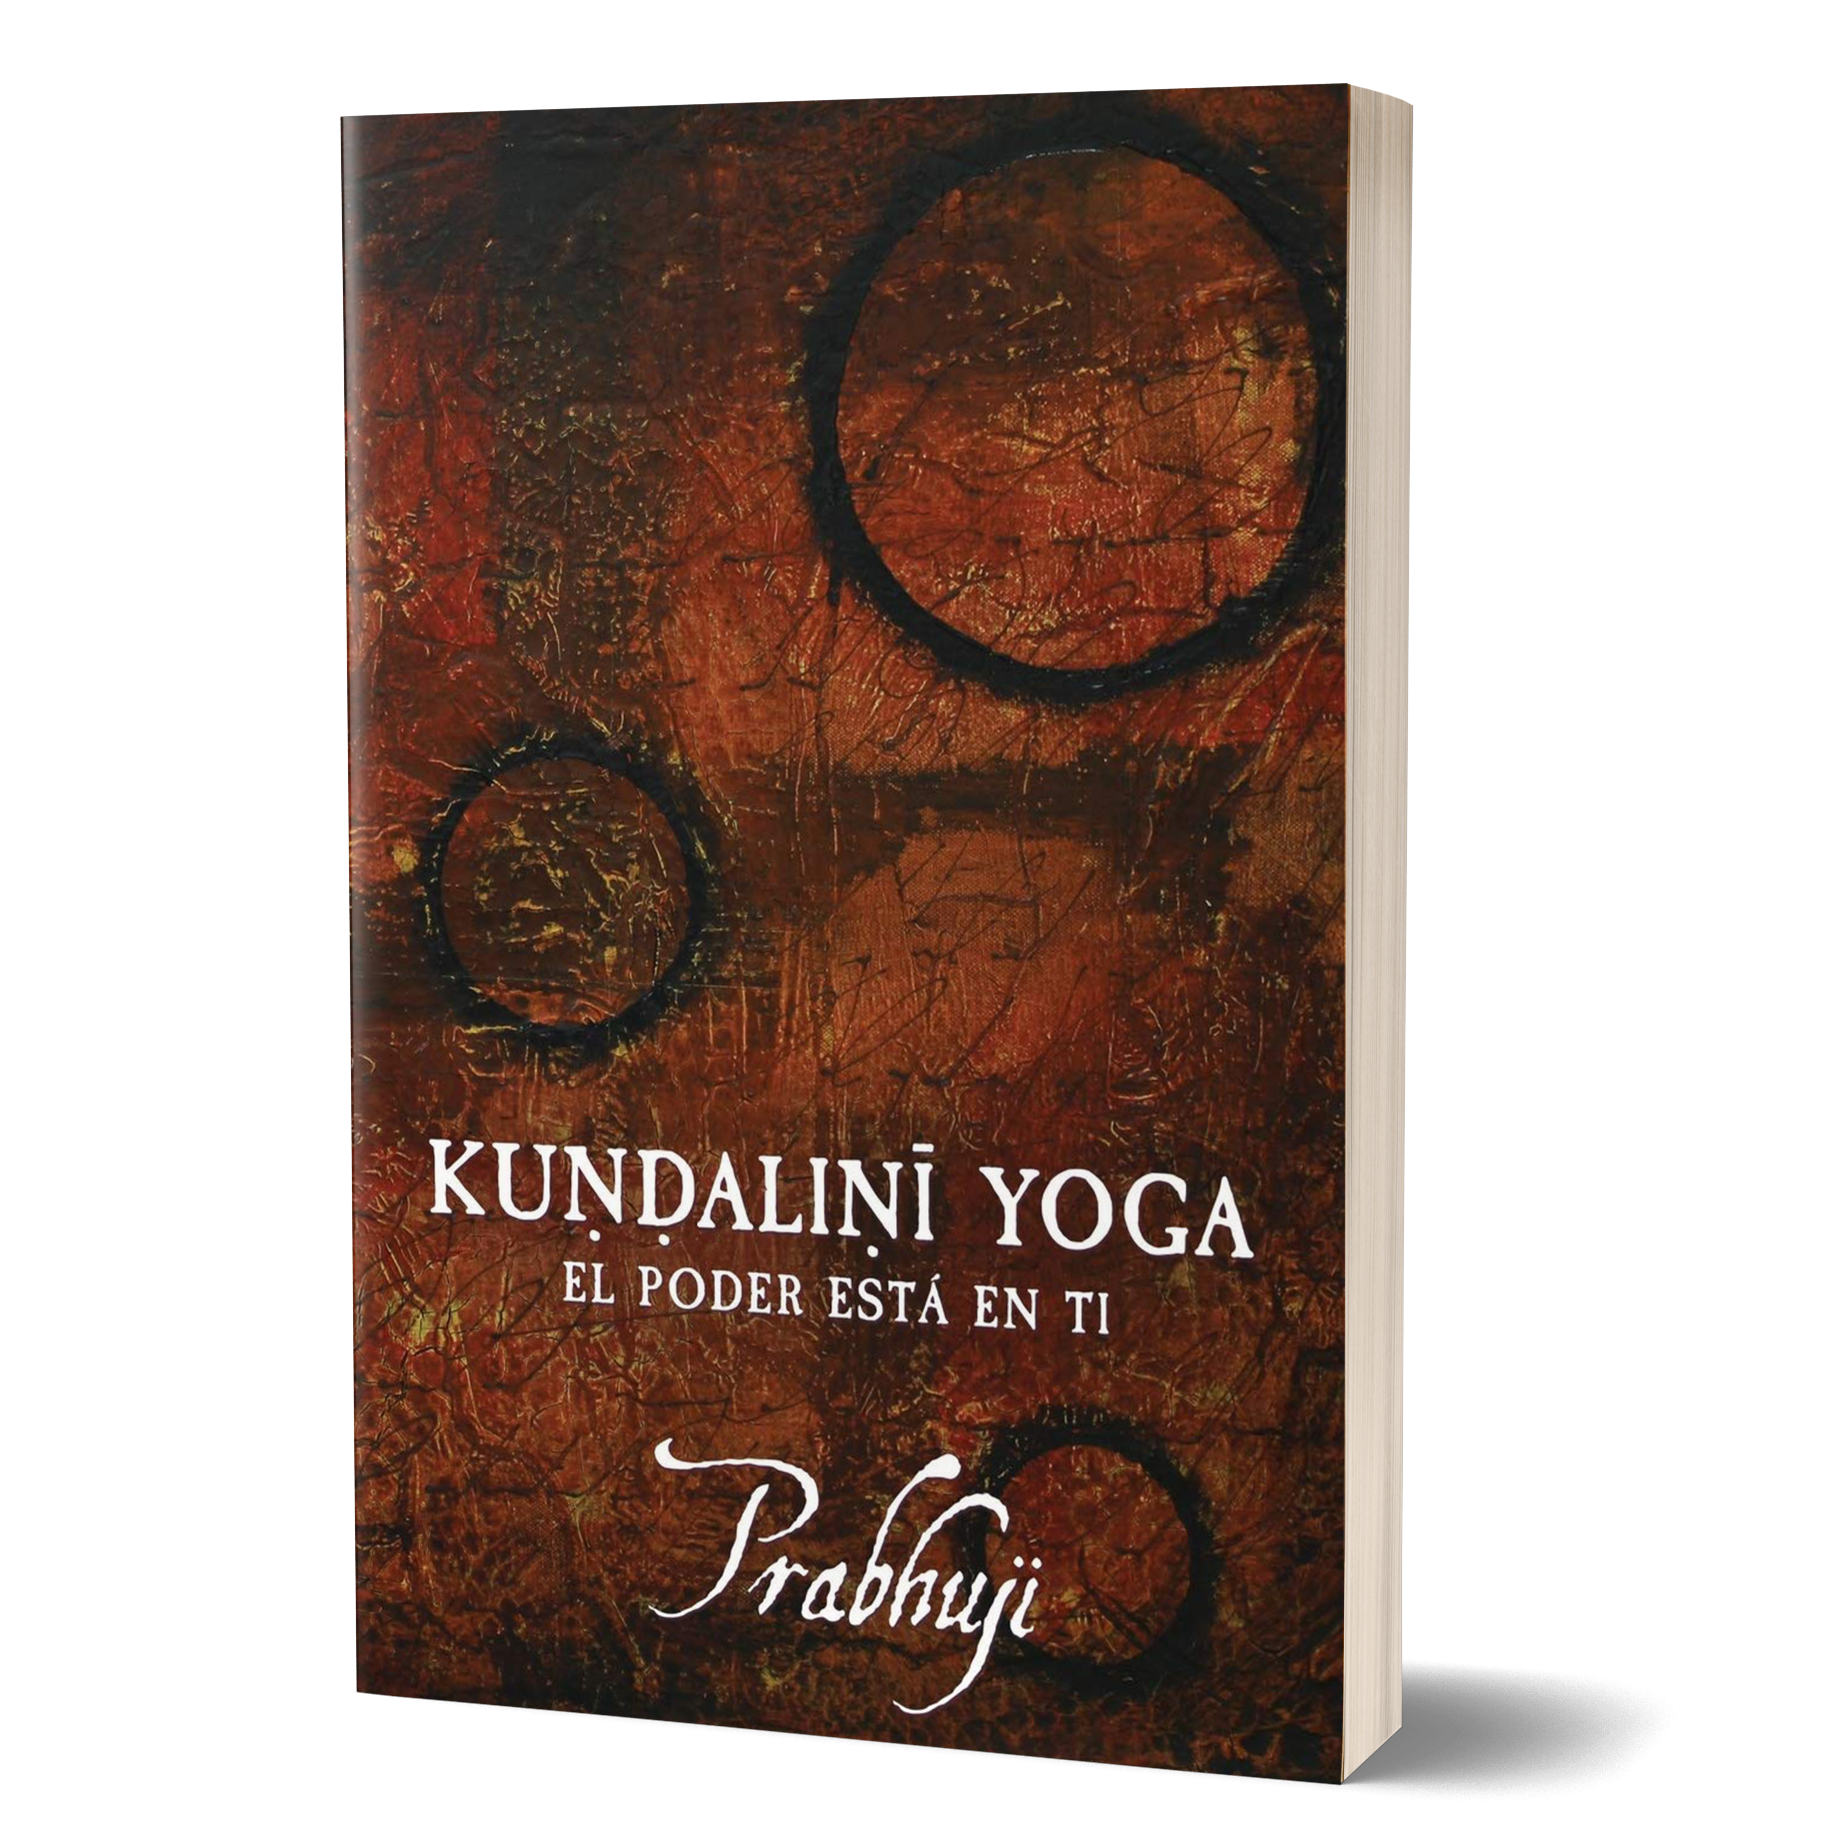 Kundalini yoga: The power is in you